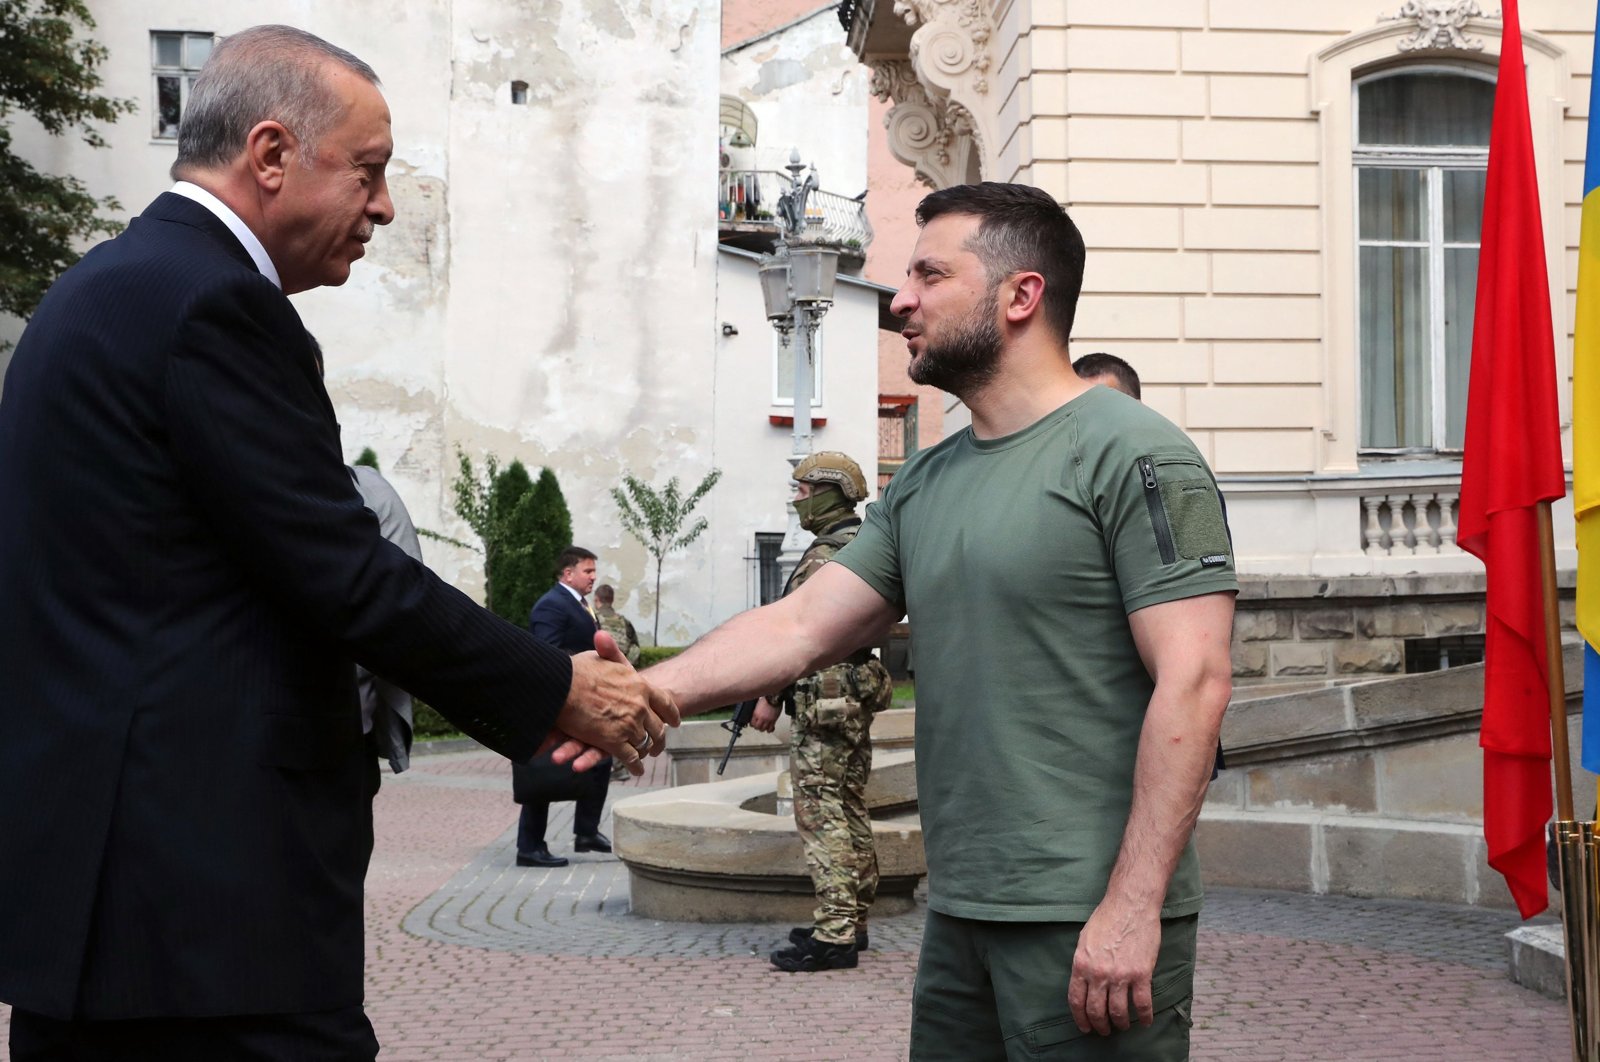 This handout picture taken and released by Turkish Presidential Press Service on Aug. 18, 2022 shows Turkish President Tayyip Erdoğan (L) and Ukrainian President Volodymyr Zelenskyy (R) as they meet in Lviv, Ukraine. (AFP Photo/Turkish Presidential Press Service)